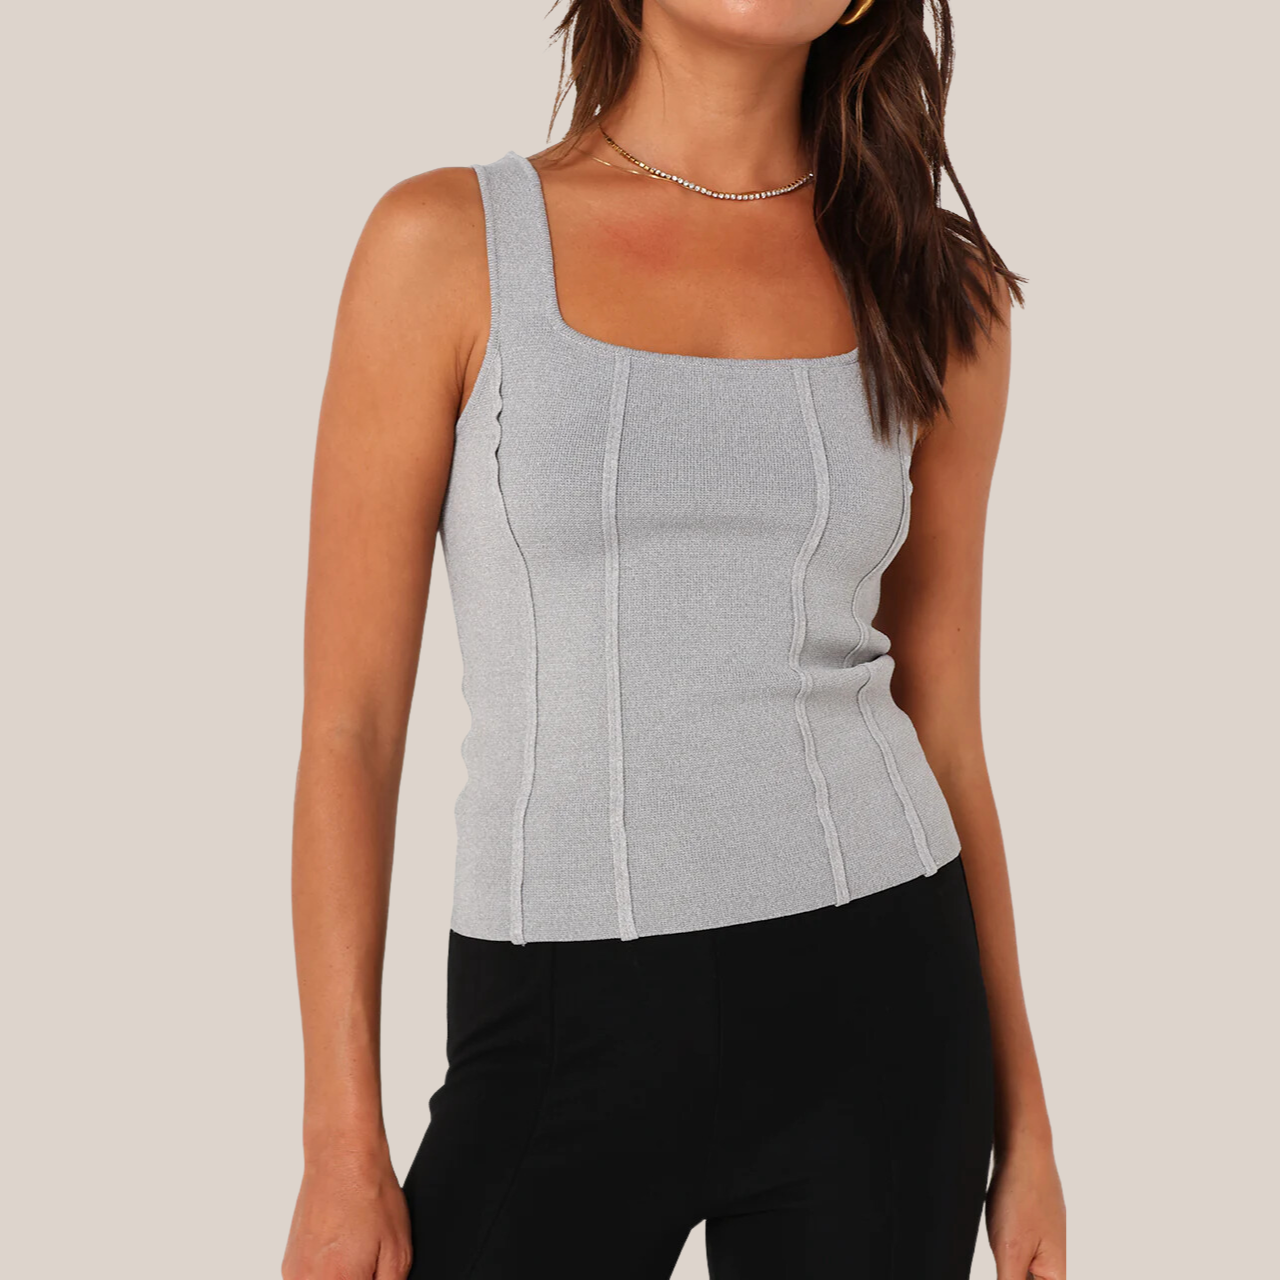 Gotstyle Fashion - Madison Tops Stretch Knit Square Neck Tank Top - Grey